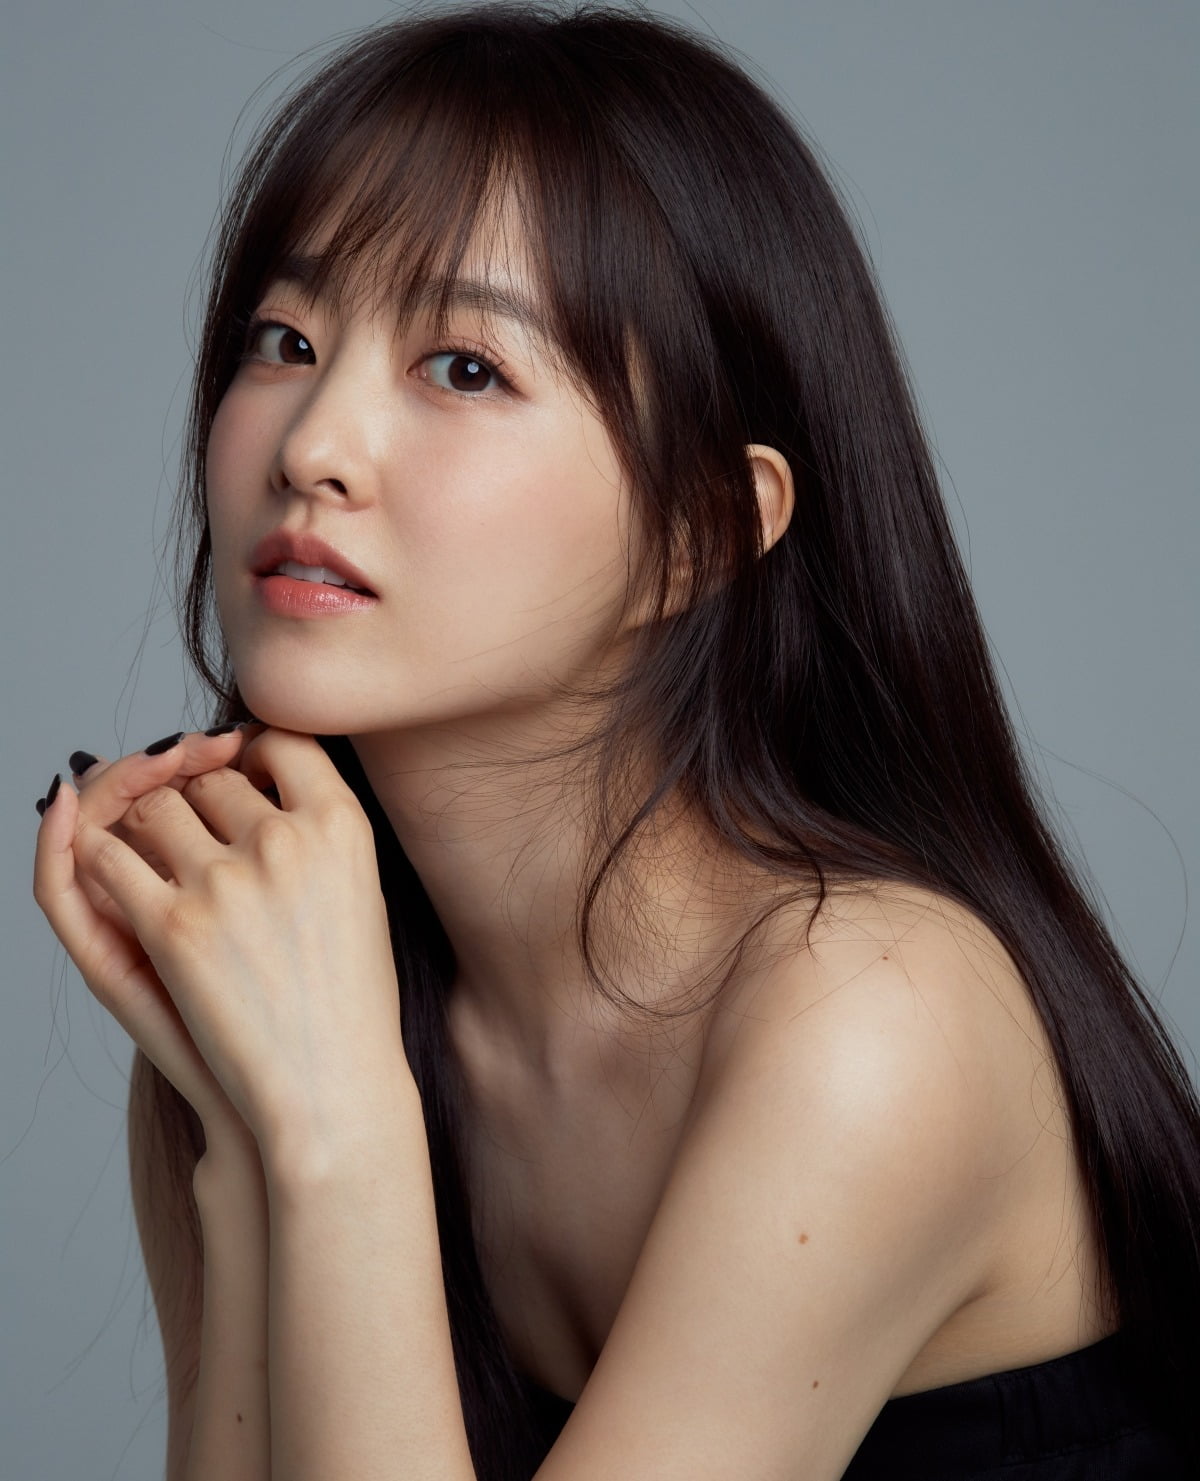 Actor Park Bo-young "I respect Lee Byung-hun's acting opposite in 'Concrete Utopia'"